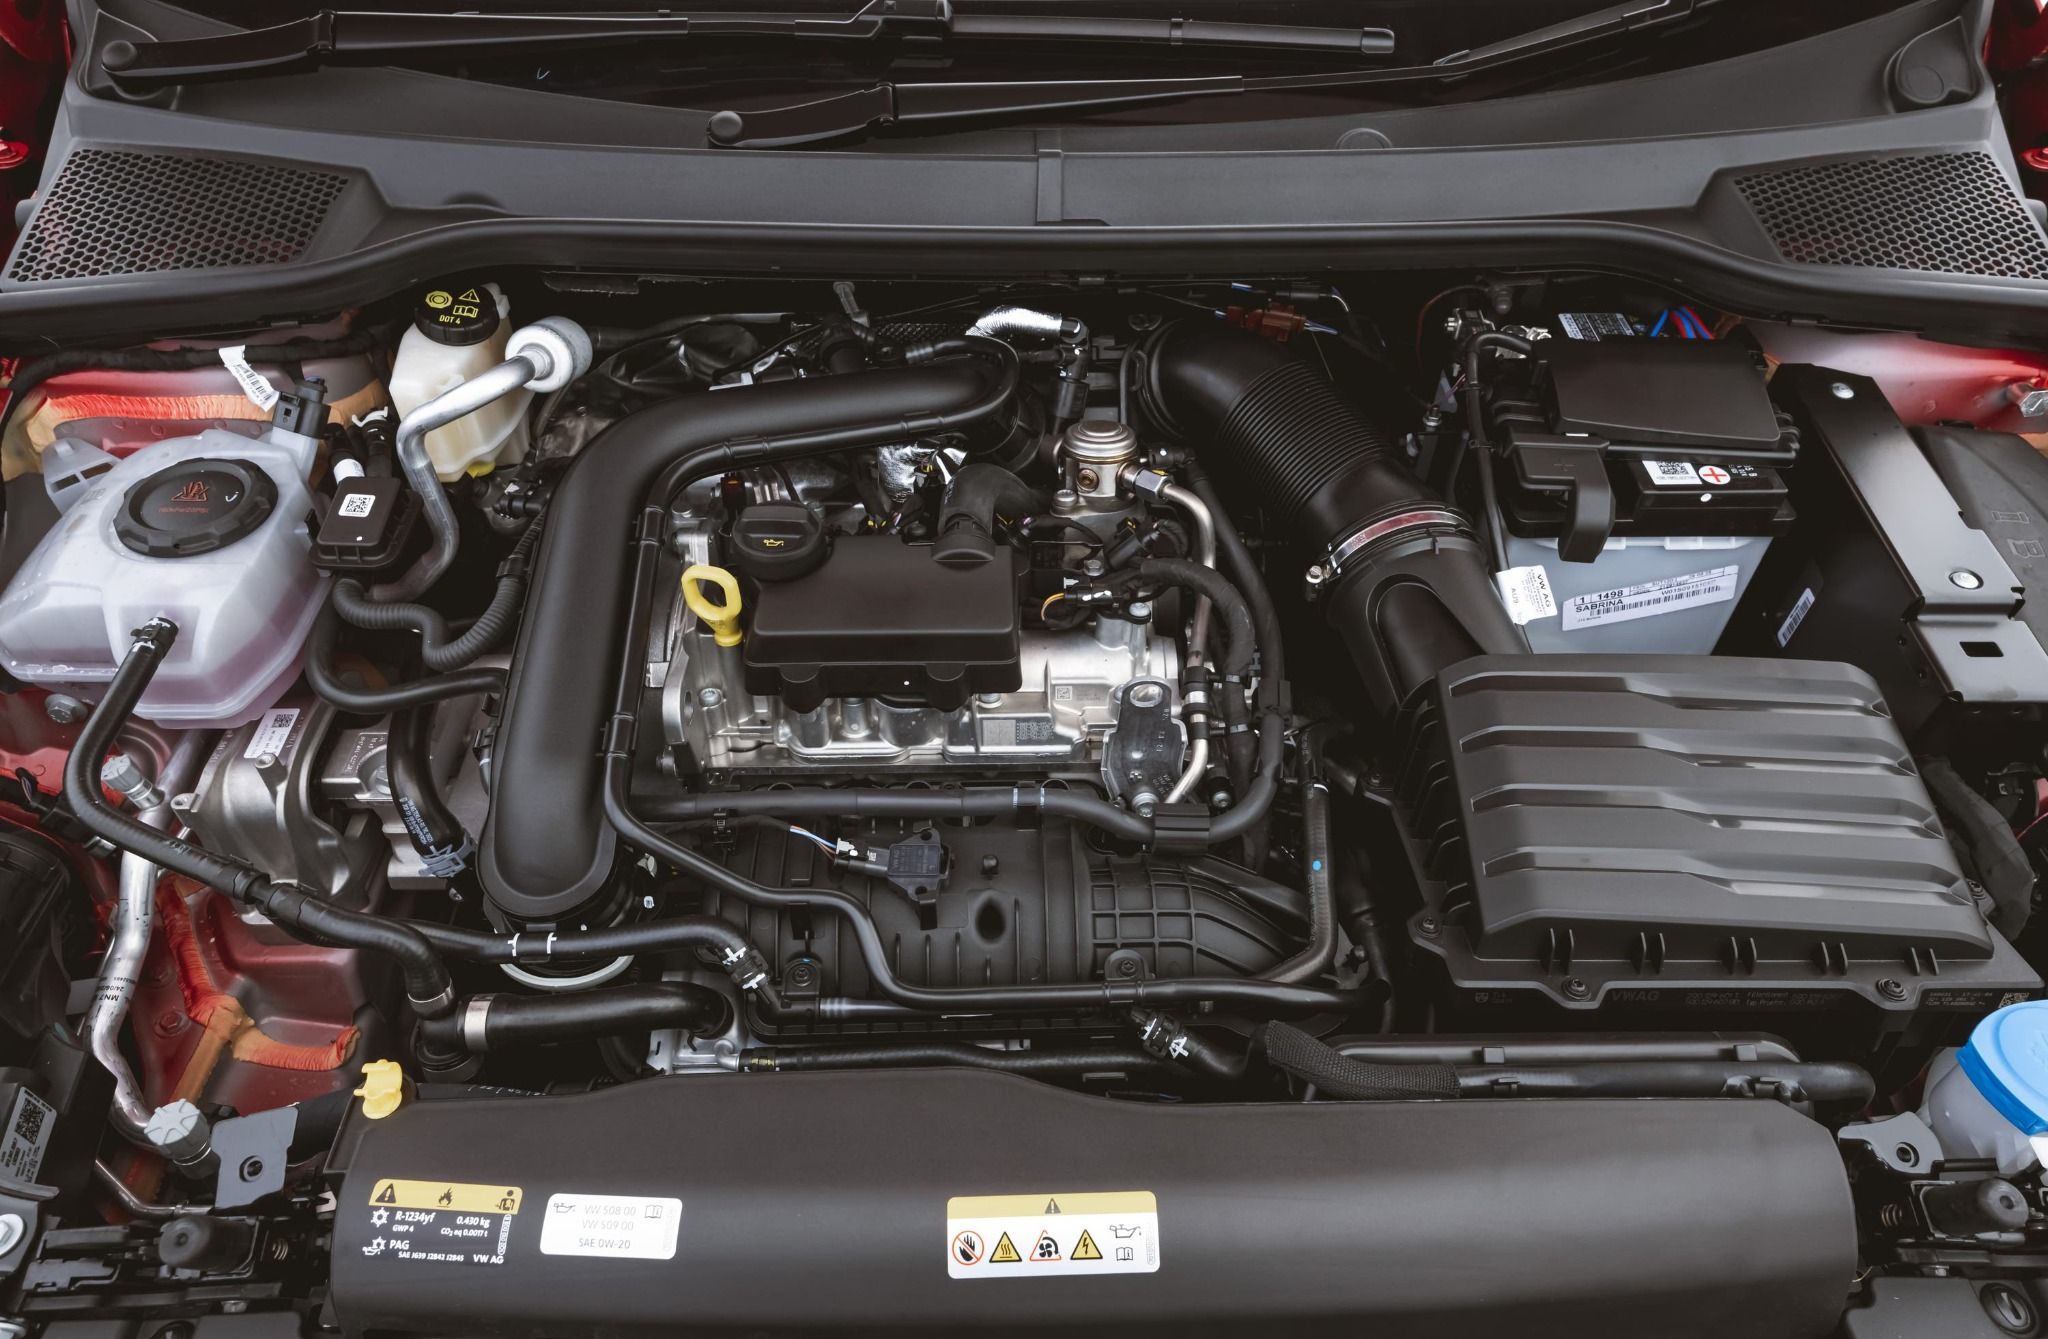 View of under the bonnet of a SEAT Ibiza